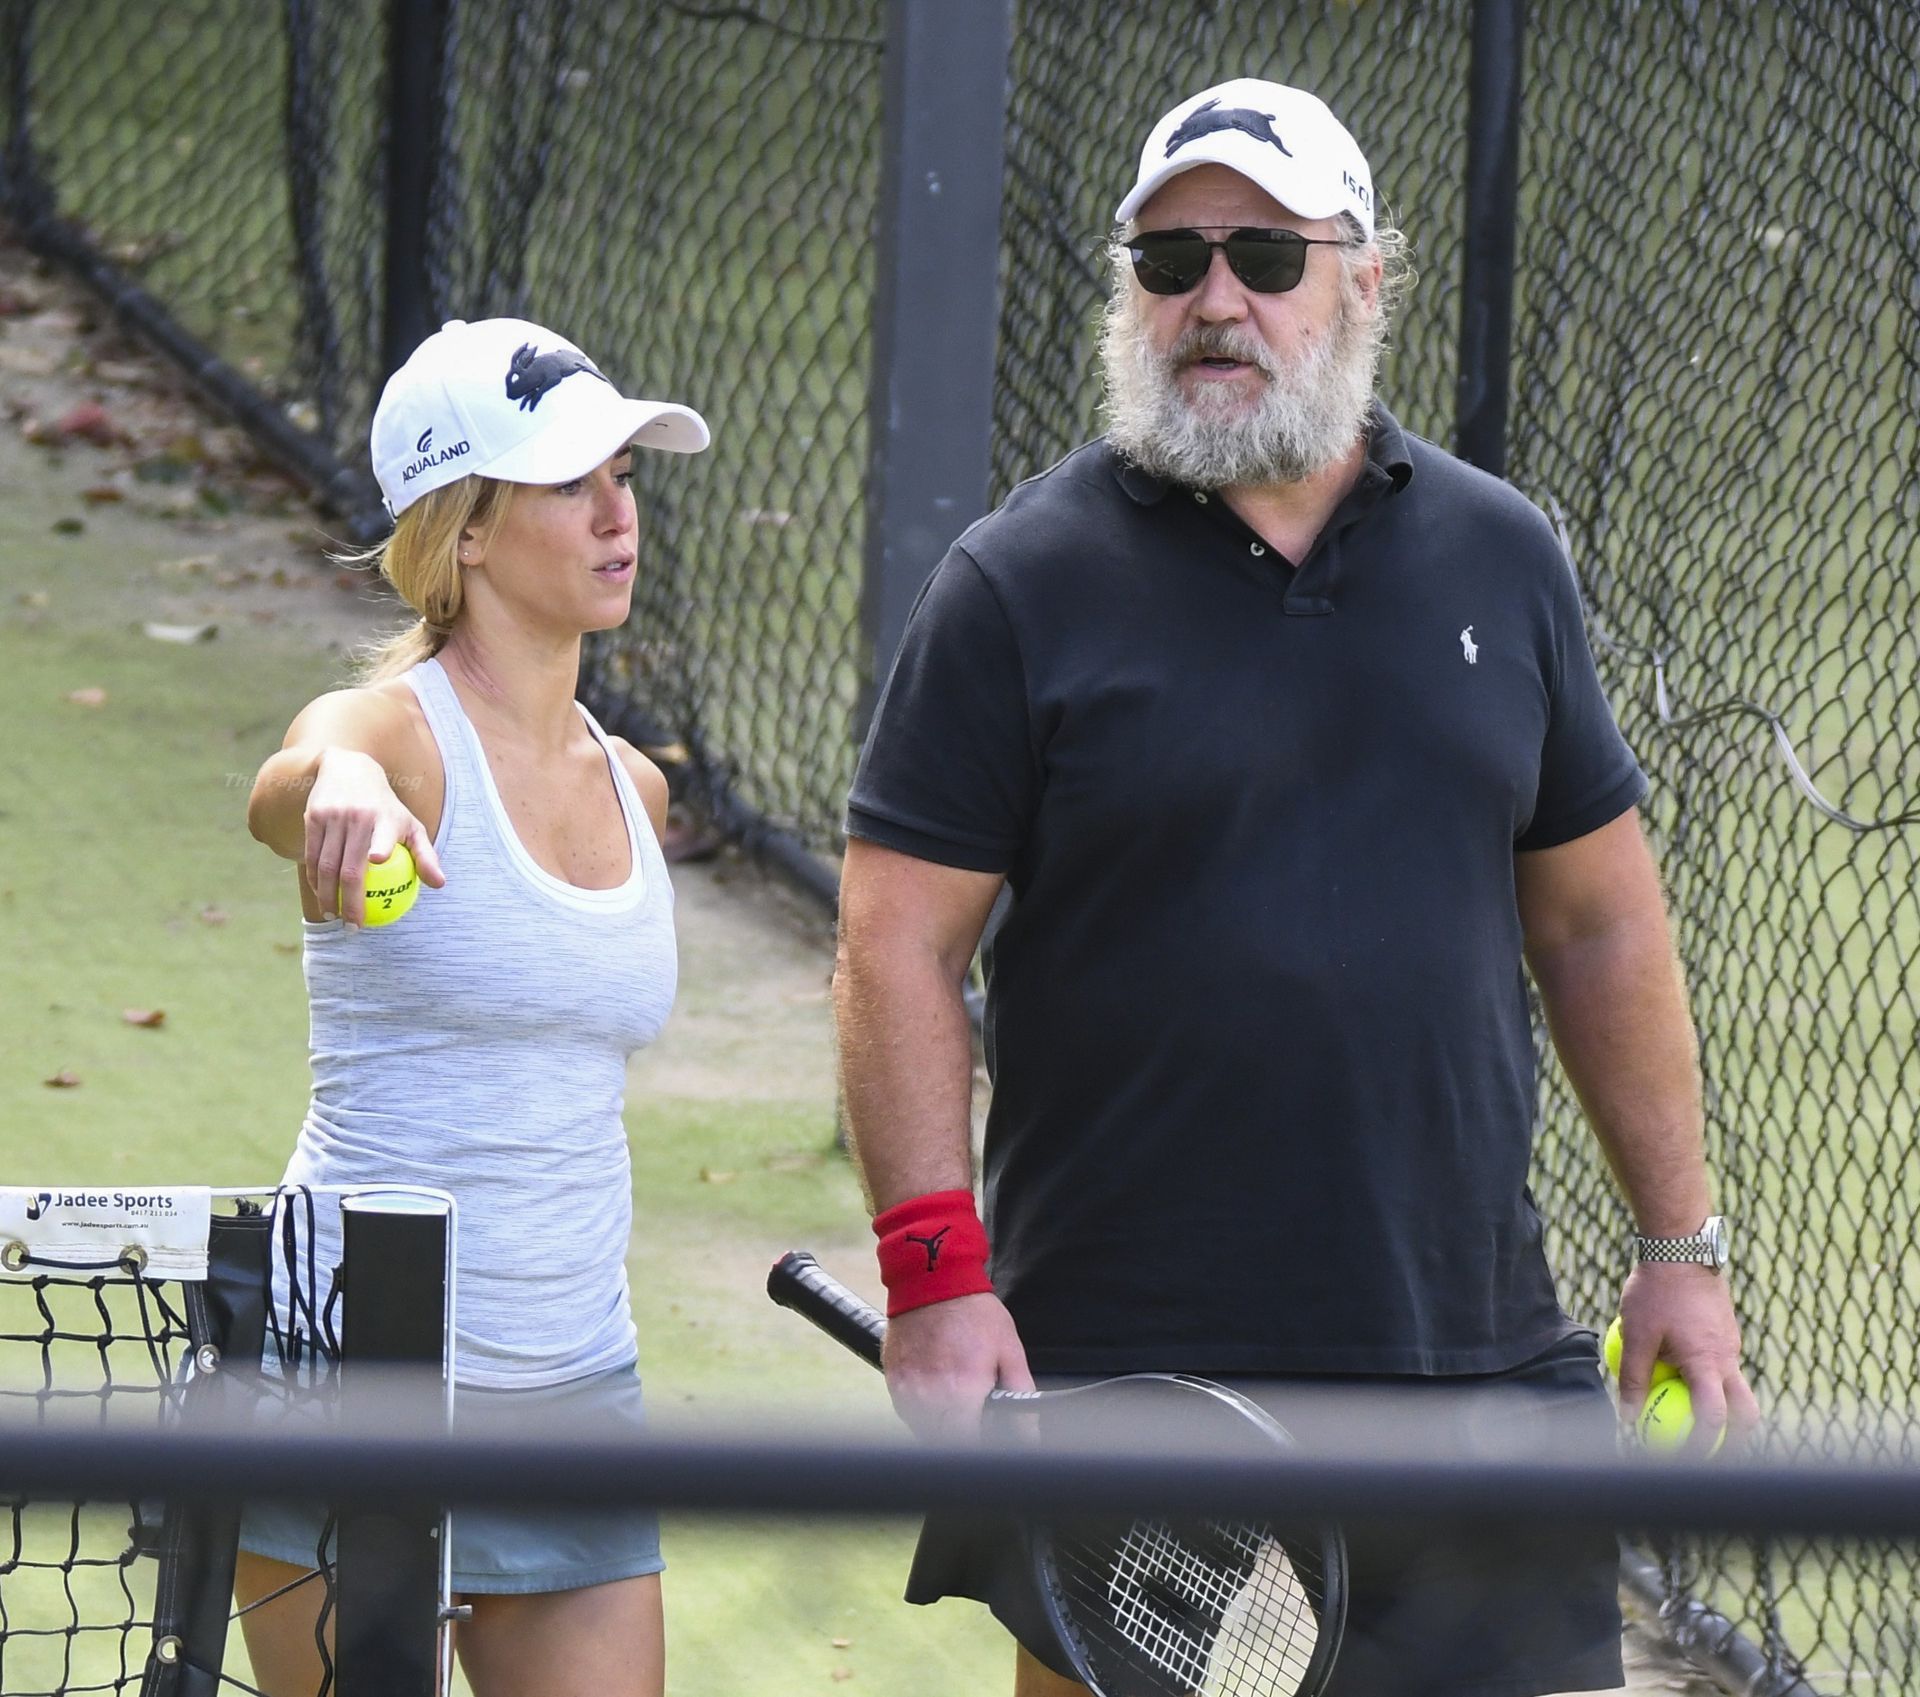 Russell Crowe & Britney Theriot Hit the Courts for Their Tennis Match in Sydney (27 Photos)